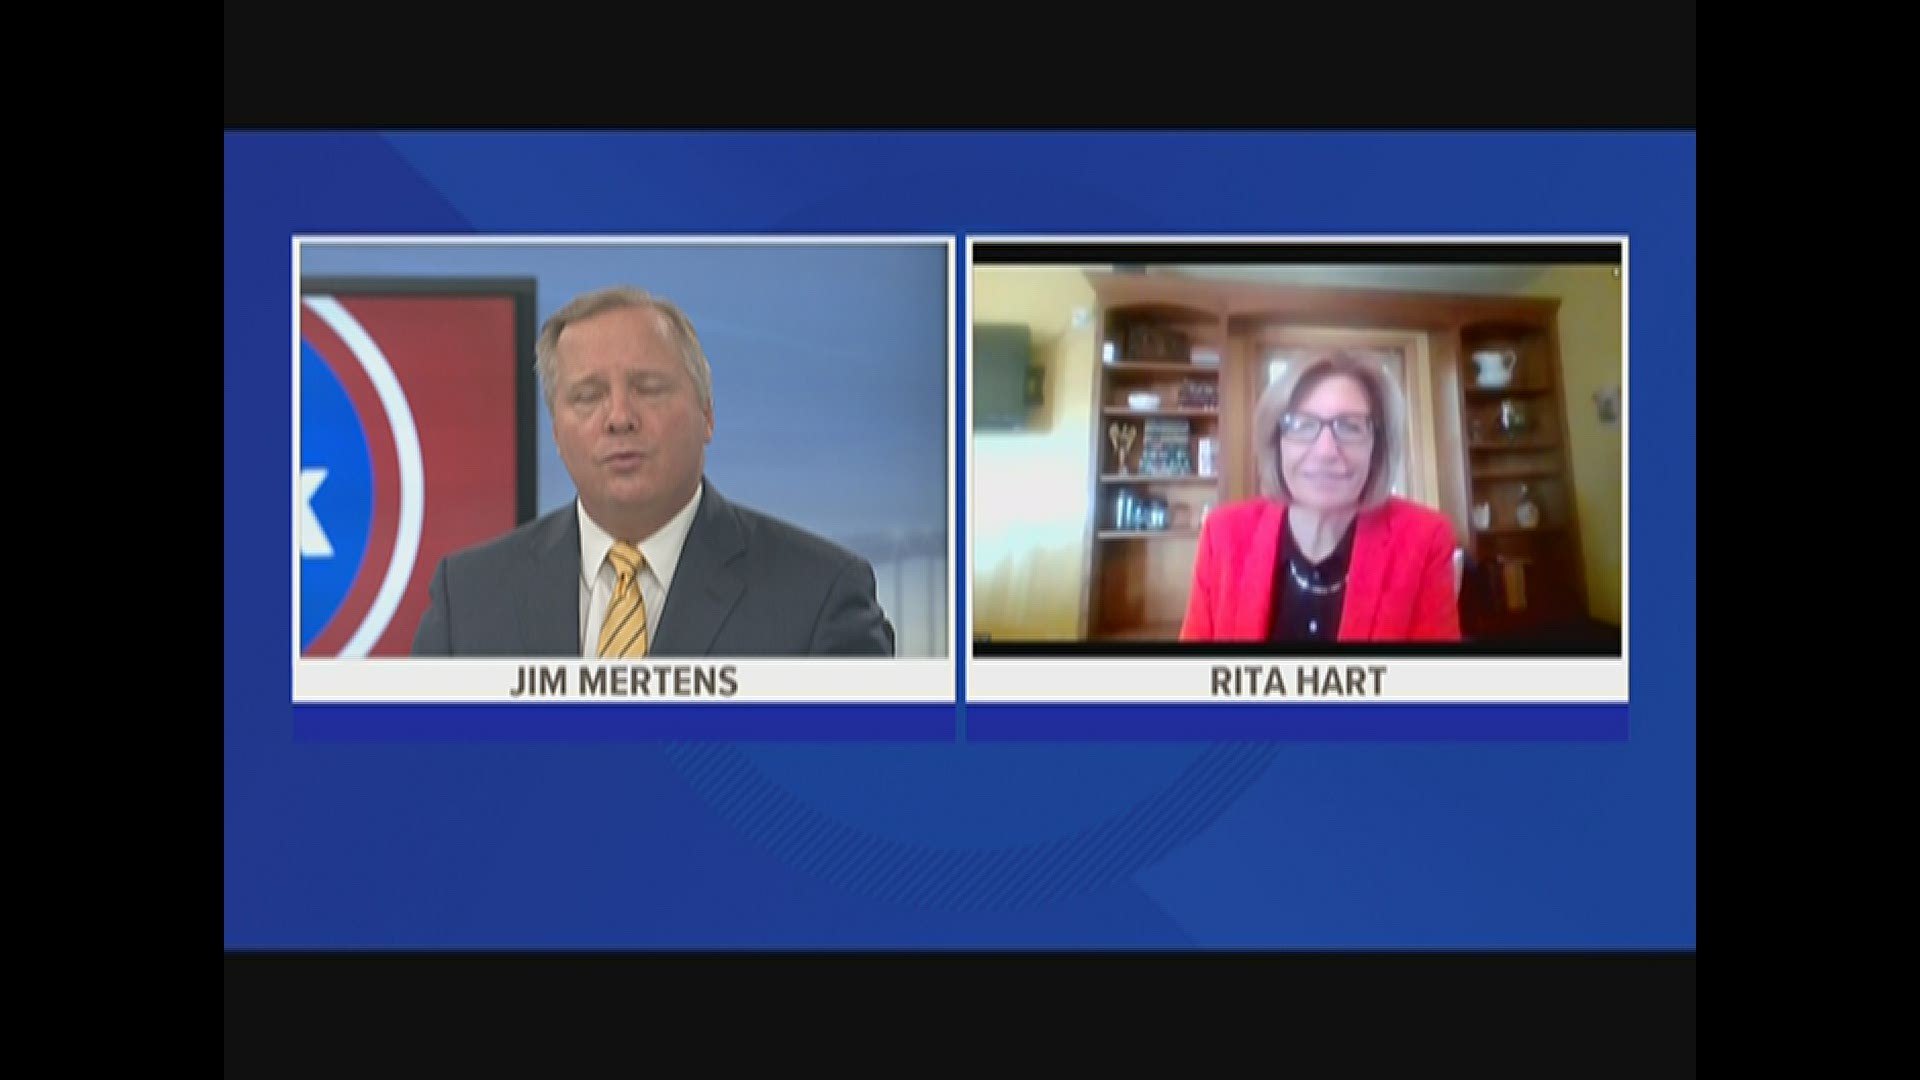 Rita Hart discusses the race for Iowa's Second Congressional District, which was a tight race against Mariannette Miller-Meeks.